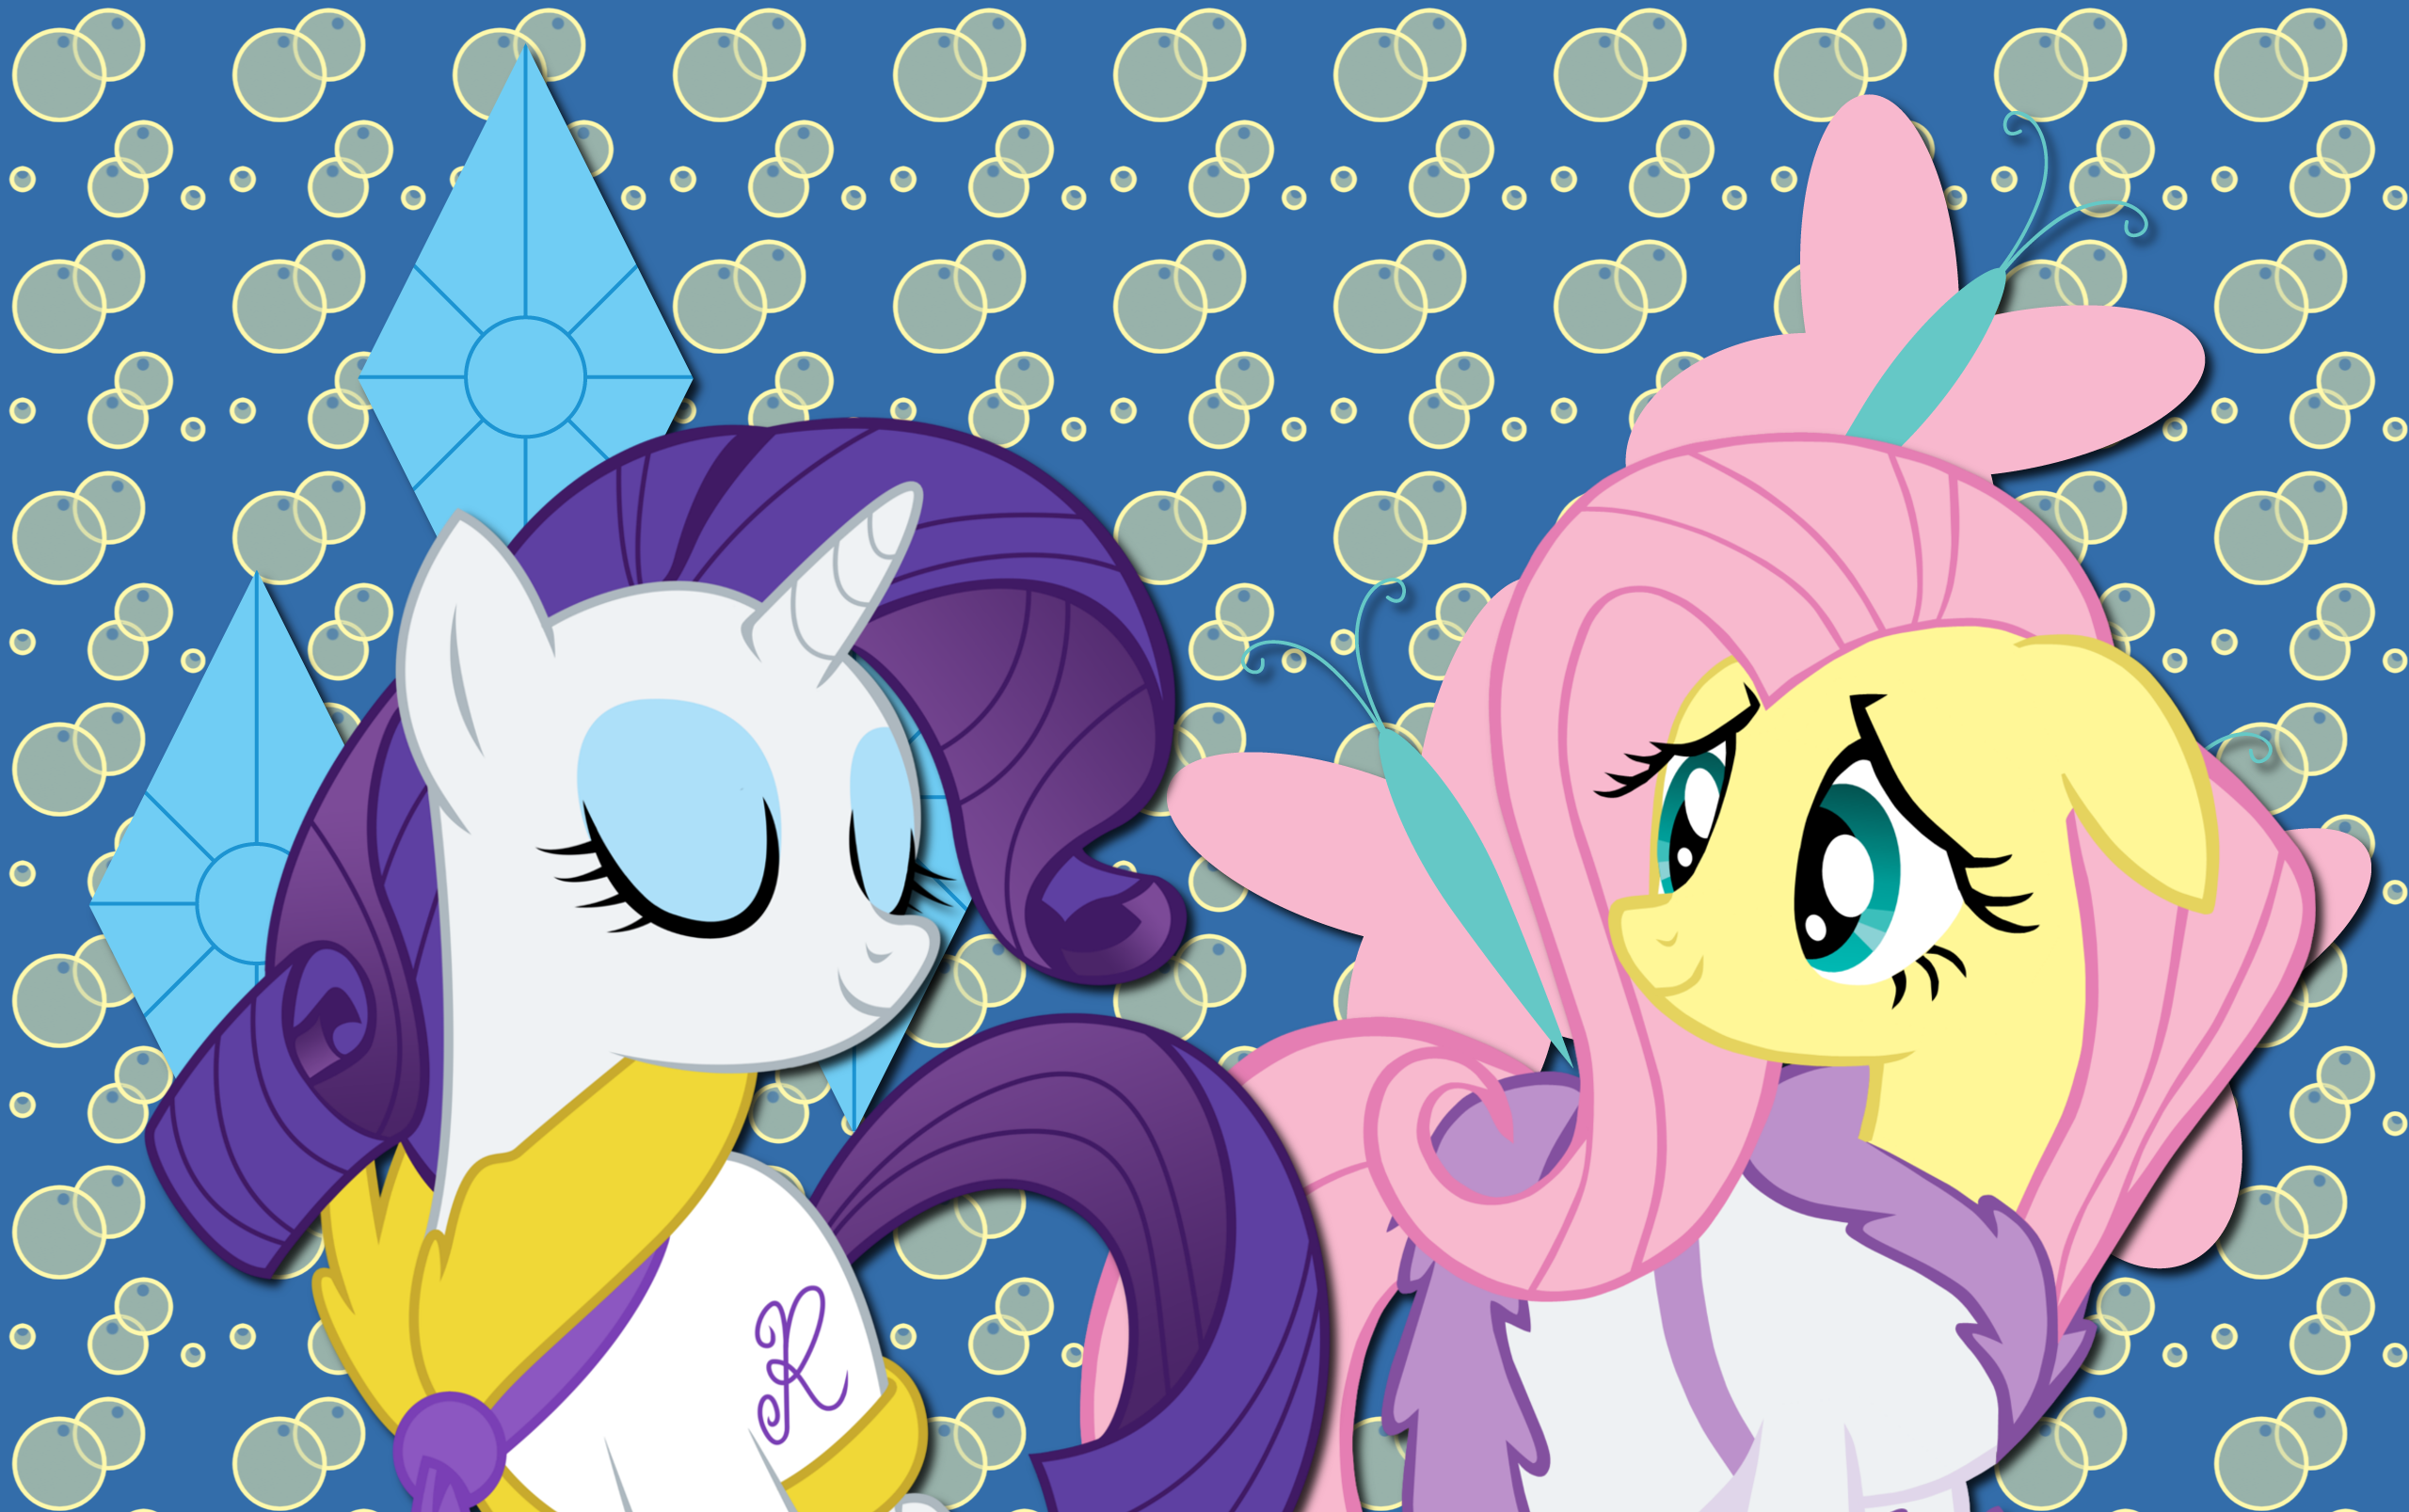 Rarity and Fluttershy WP by AliceHumanSacrifice0, FrankRT, Kooner-cz and ooklah